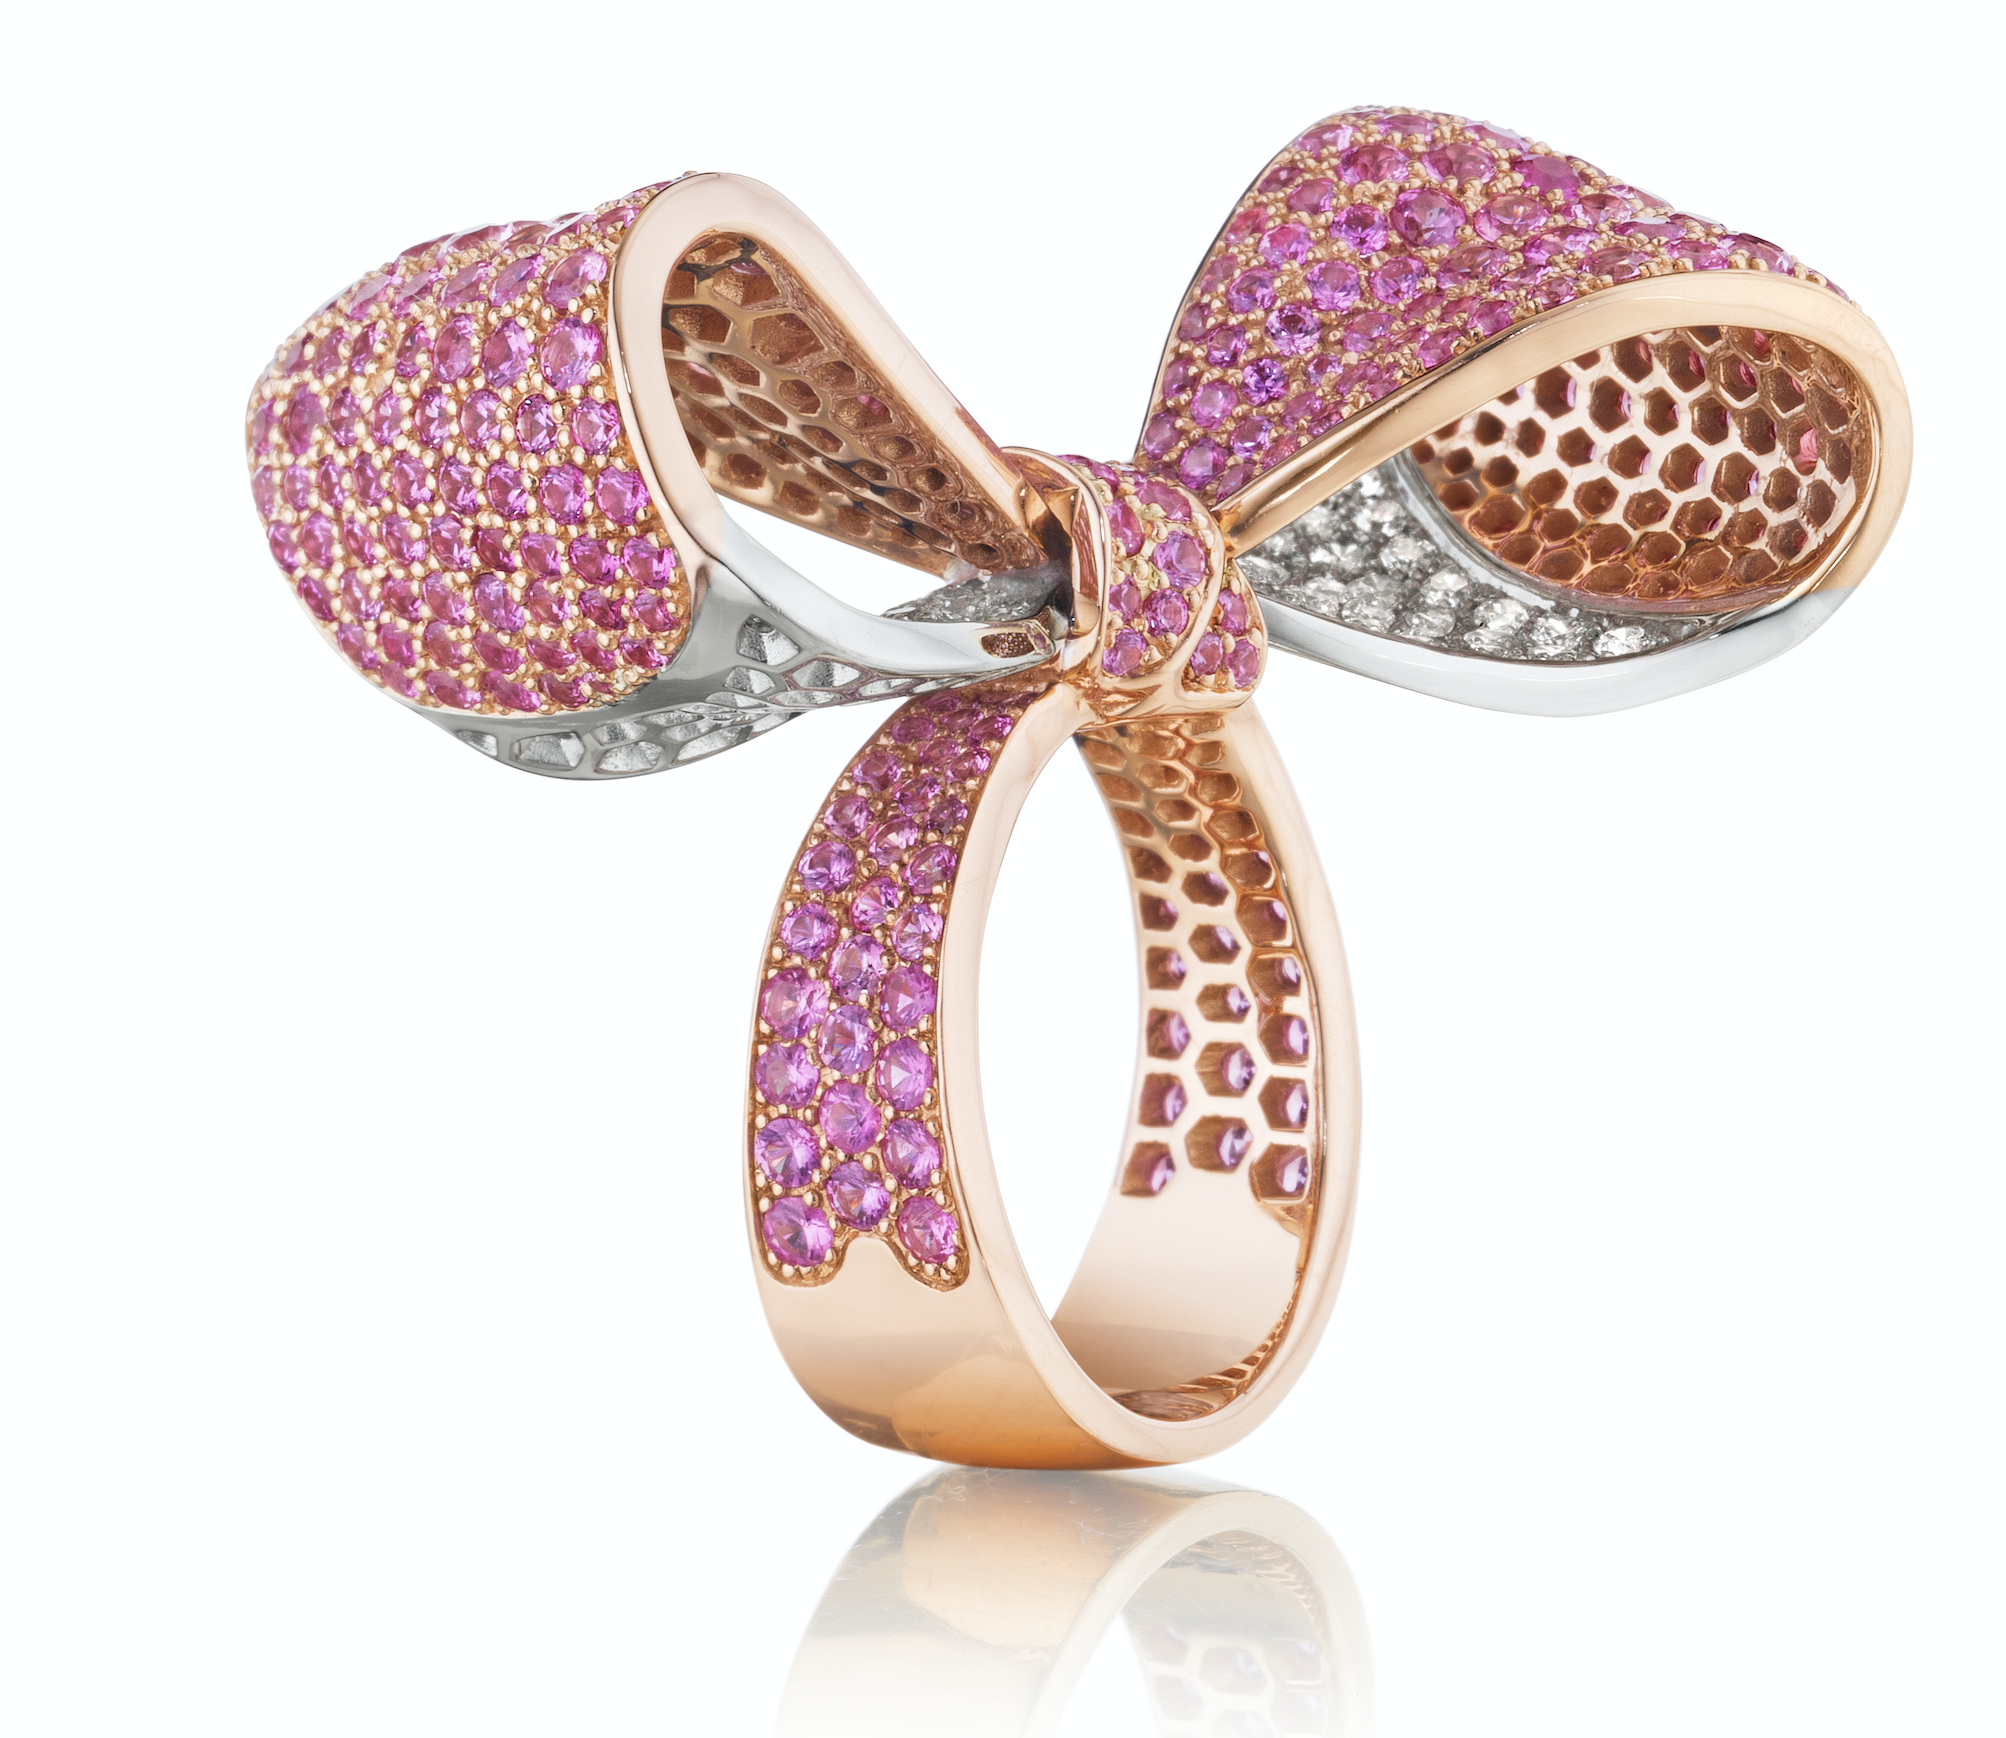 Mimi So, Bow Ring, handcrafted in 18k rose and white gold, pink sapphires and diamonds.